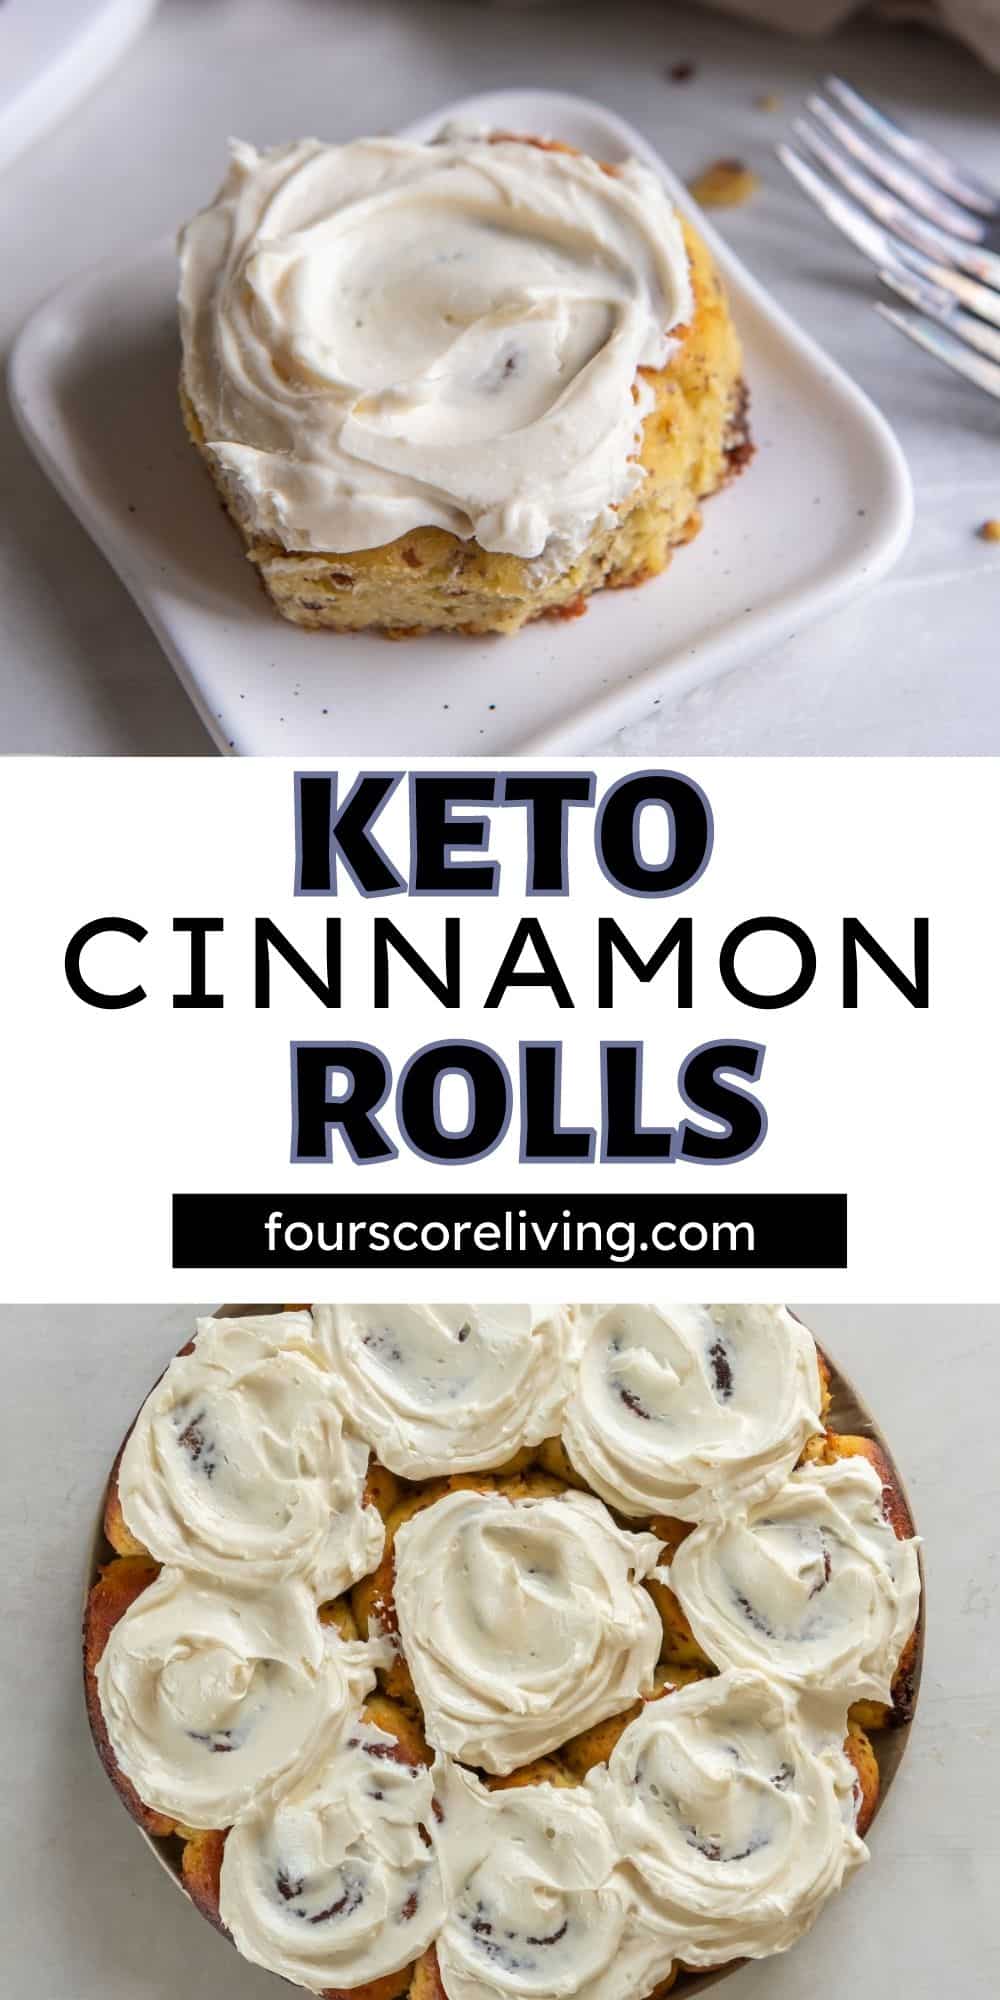 two images of frosted cinnamon rolls. Title in center says Keto Cinnamon Rolls